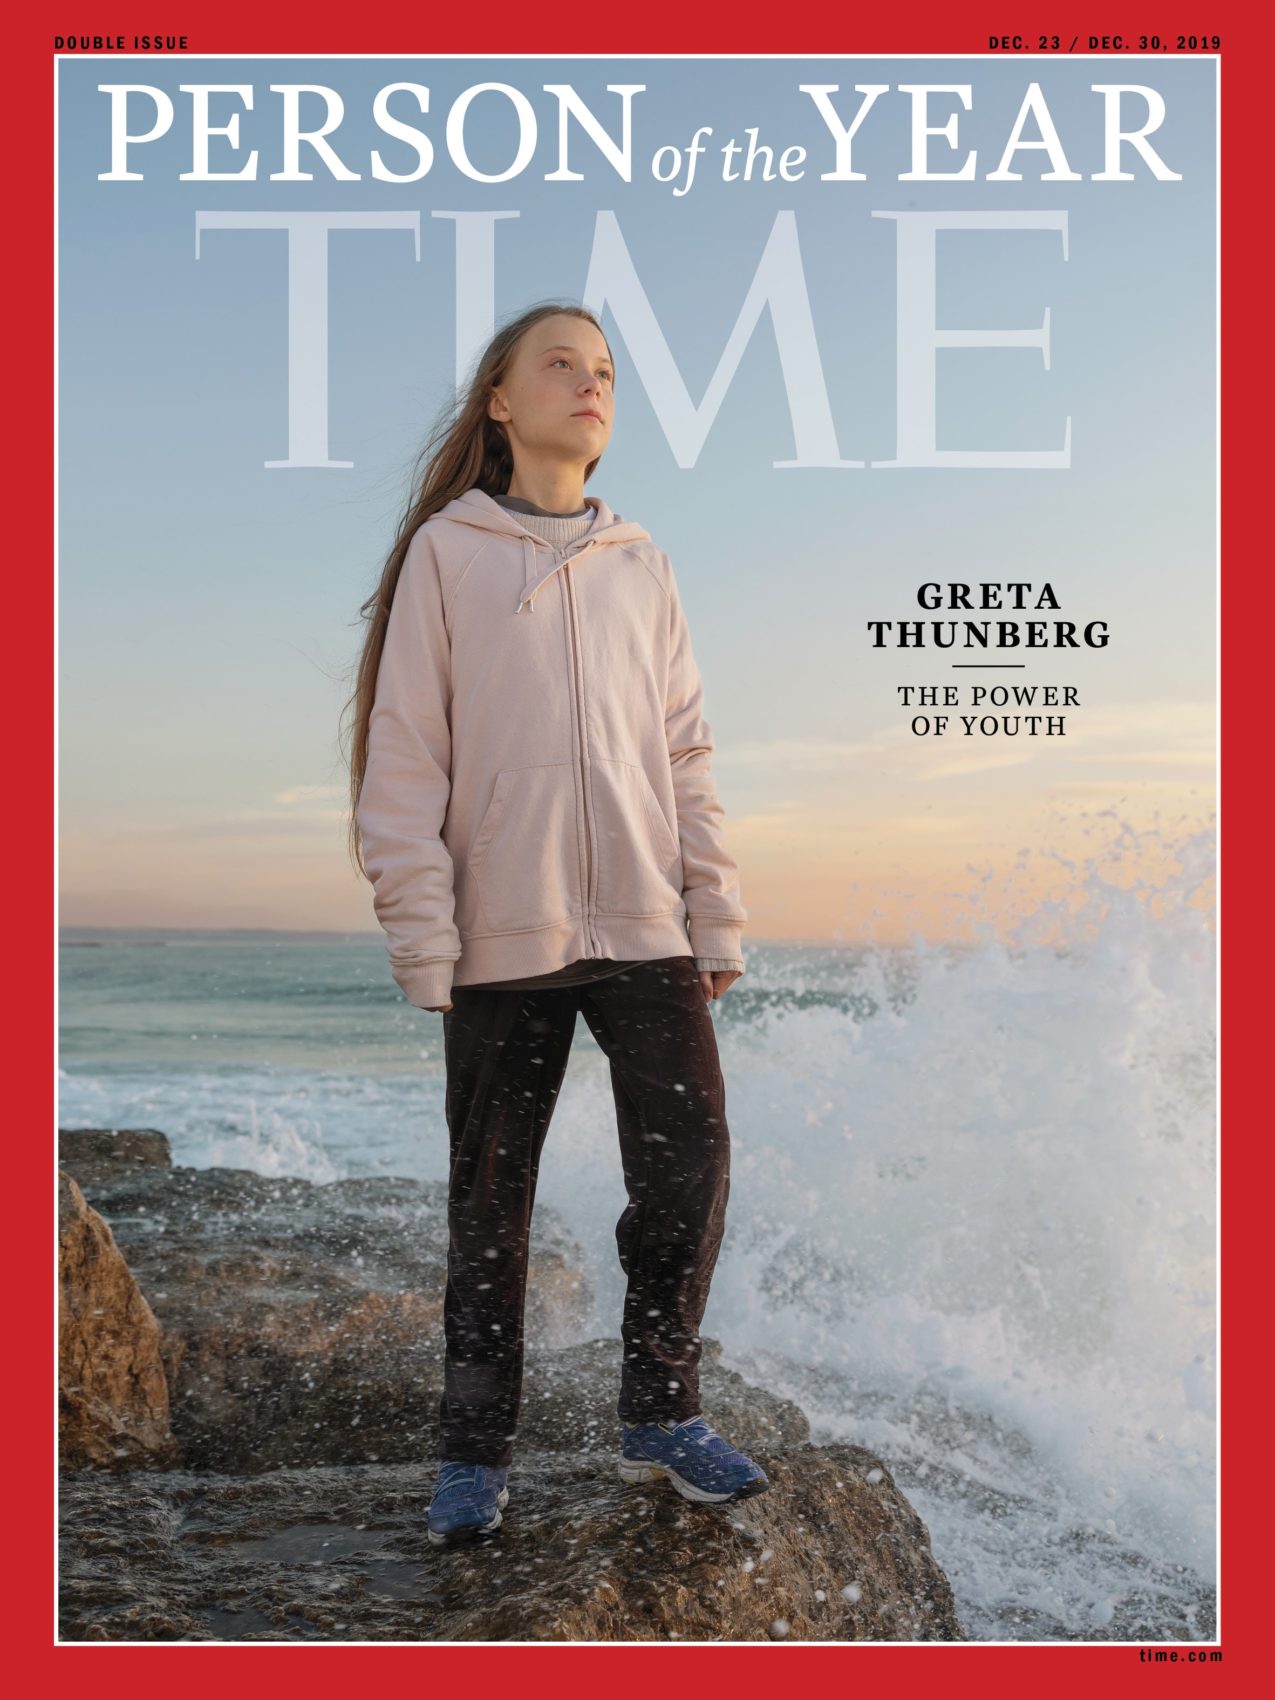 Greta Thunberg, time, person of the year, 2019